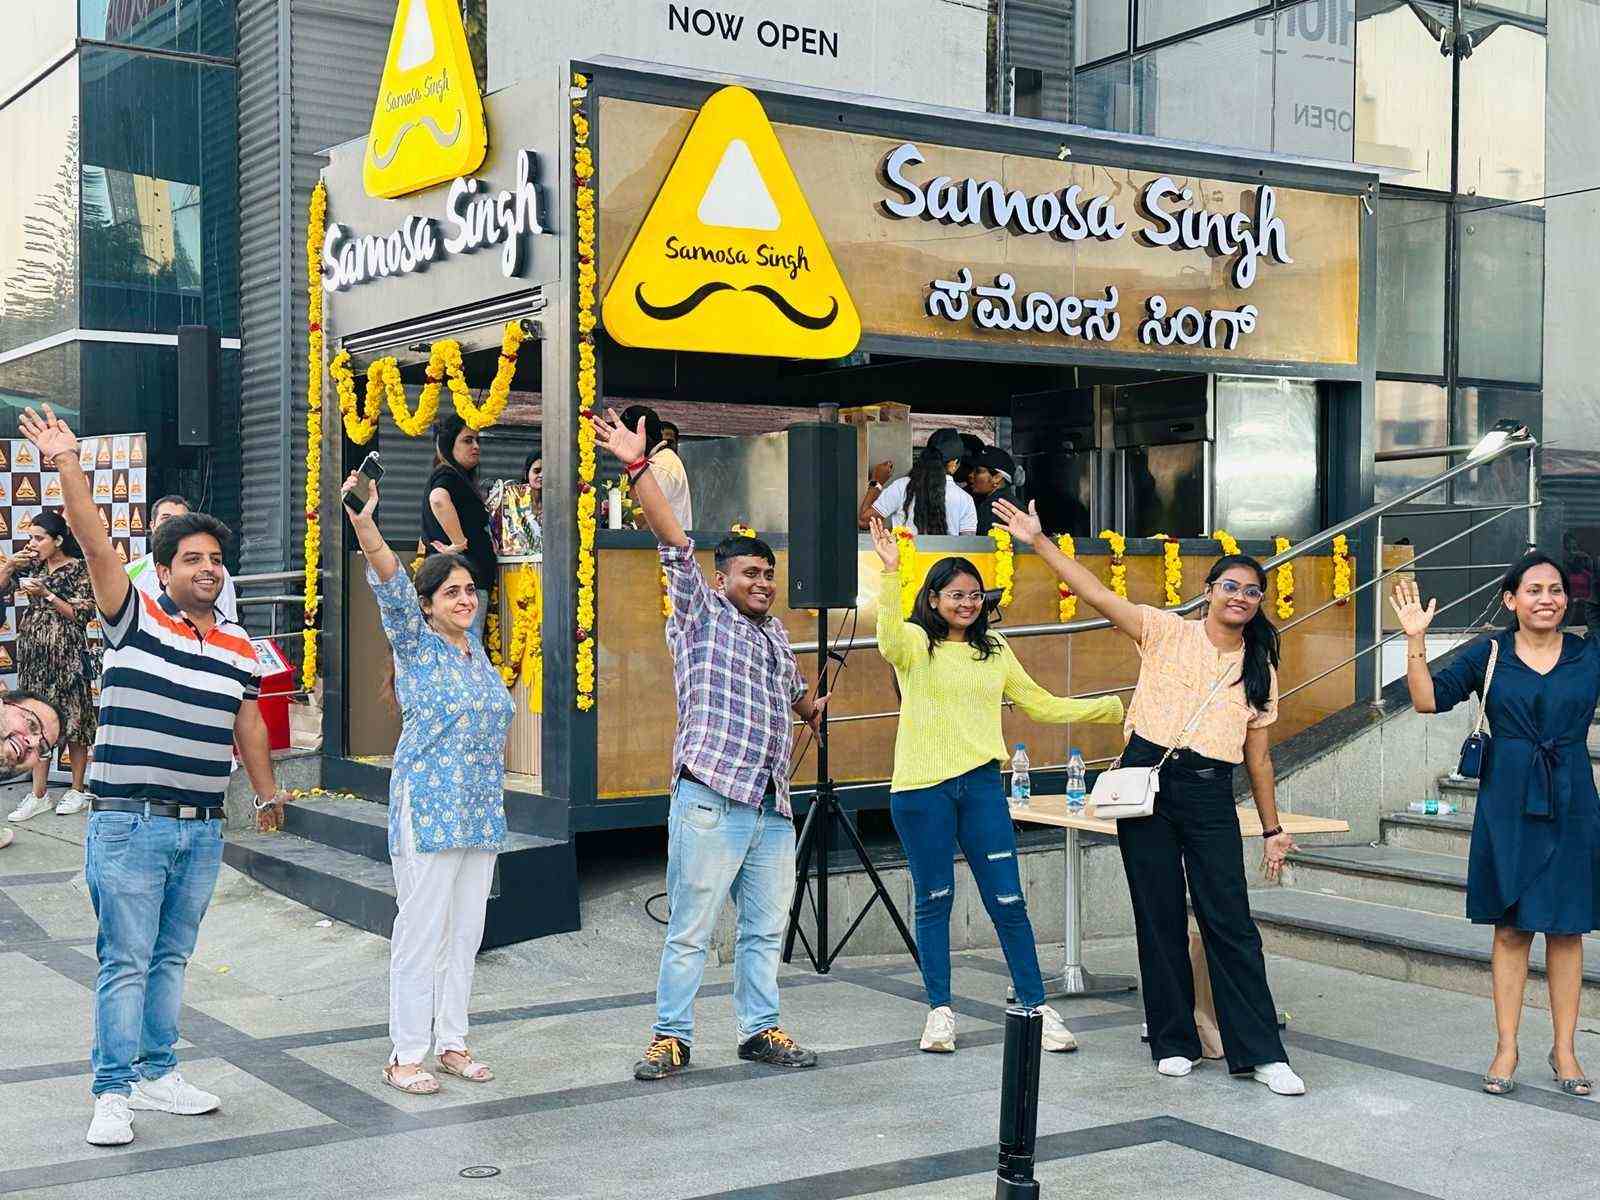 The brand has made a name among people for its samosas that stay crispy for over six hours